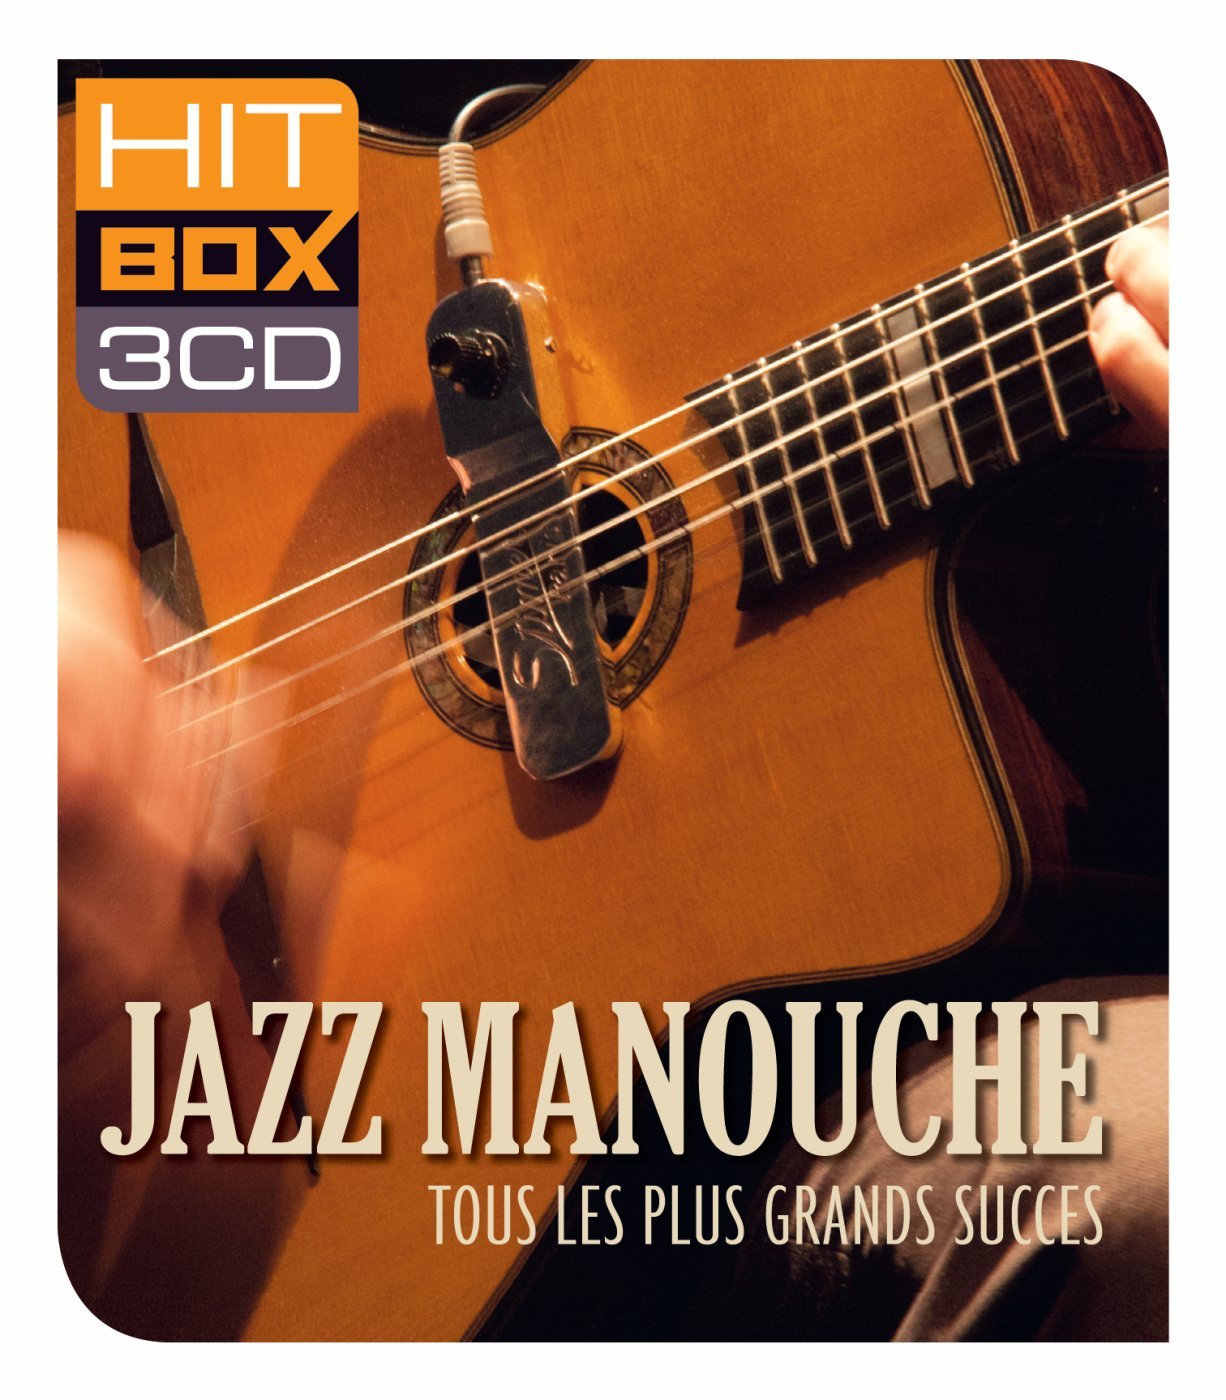 JAZZ MANOUCHE: THE VERY BEST IN GIPSY JAZZ - Rosenberg Trio, Stephane Grappelli and more (3 CDs)